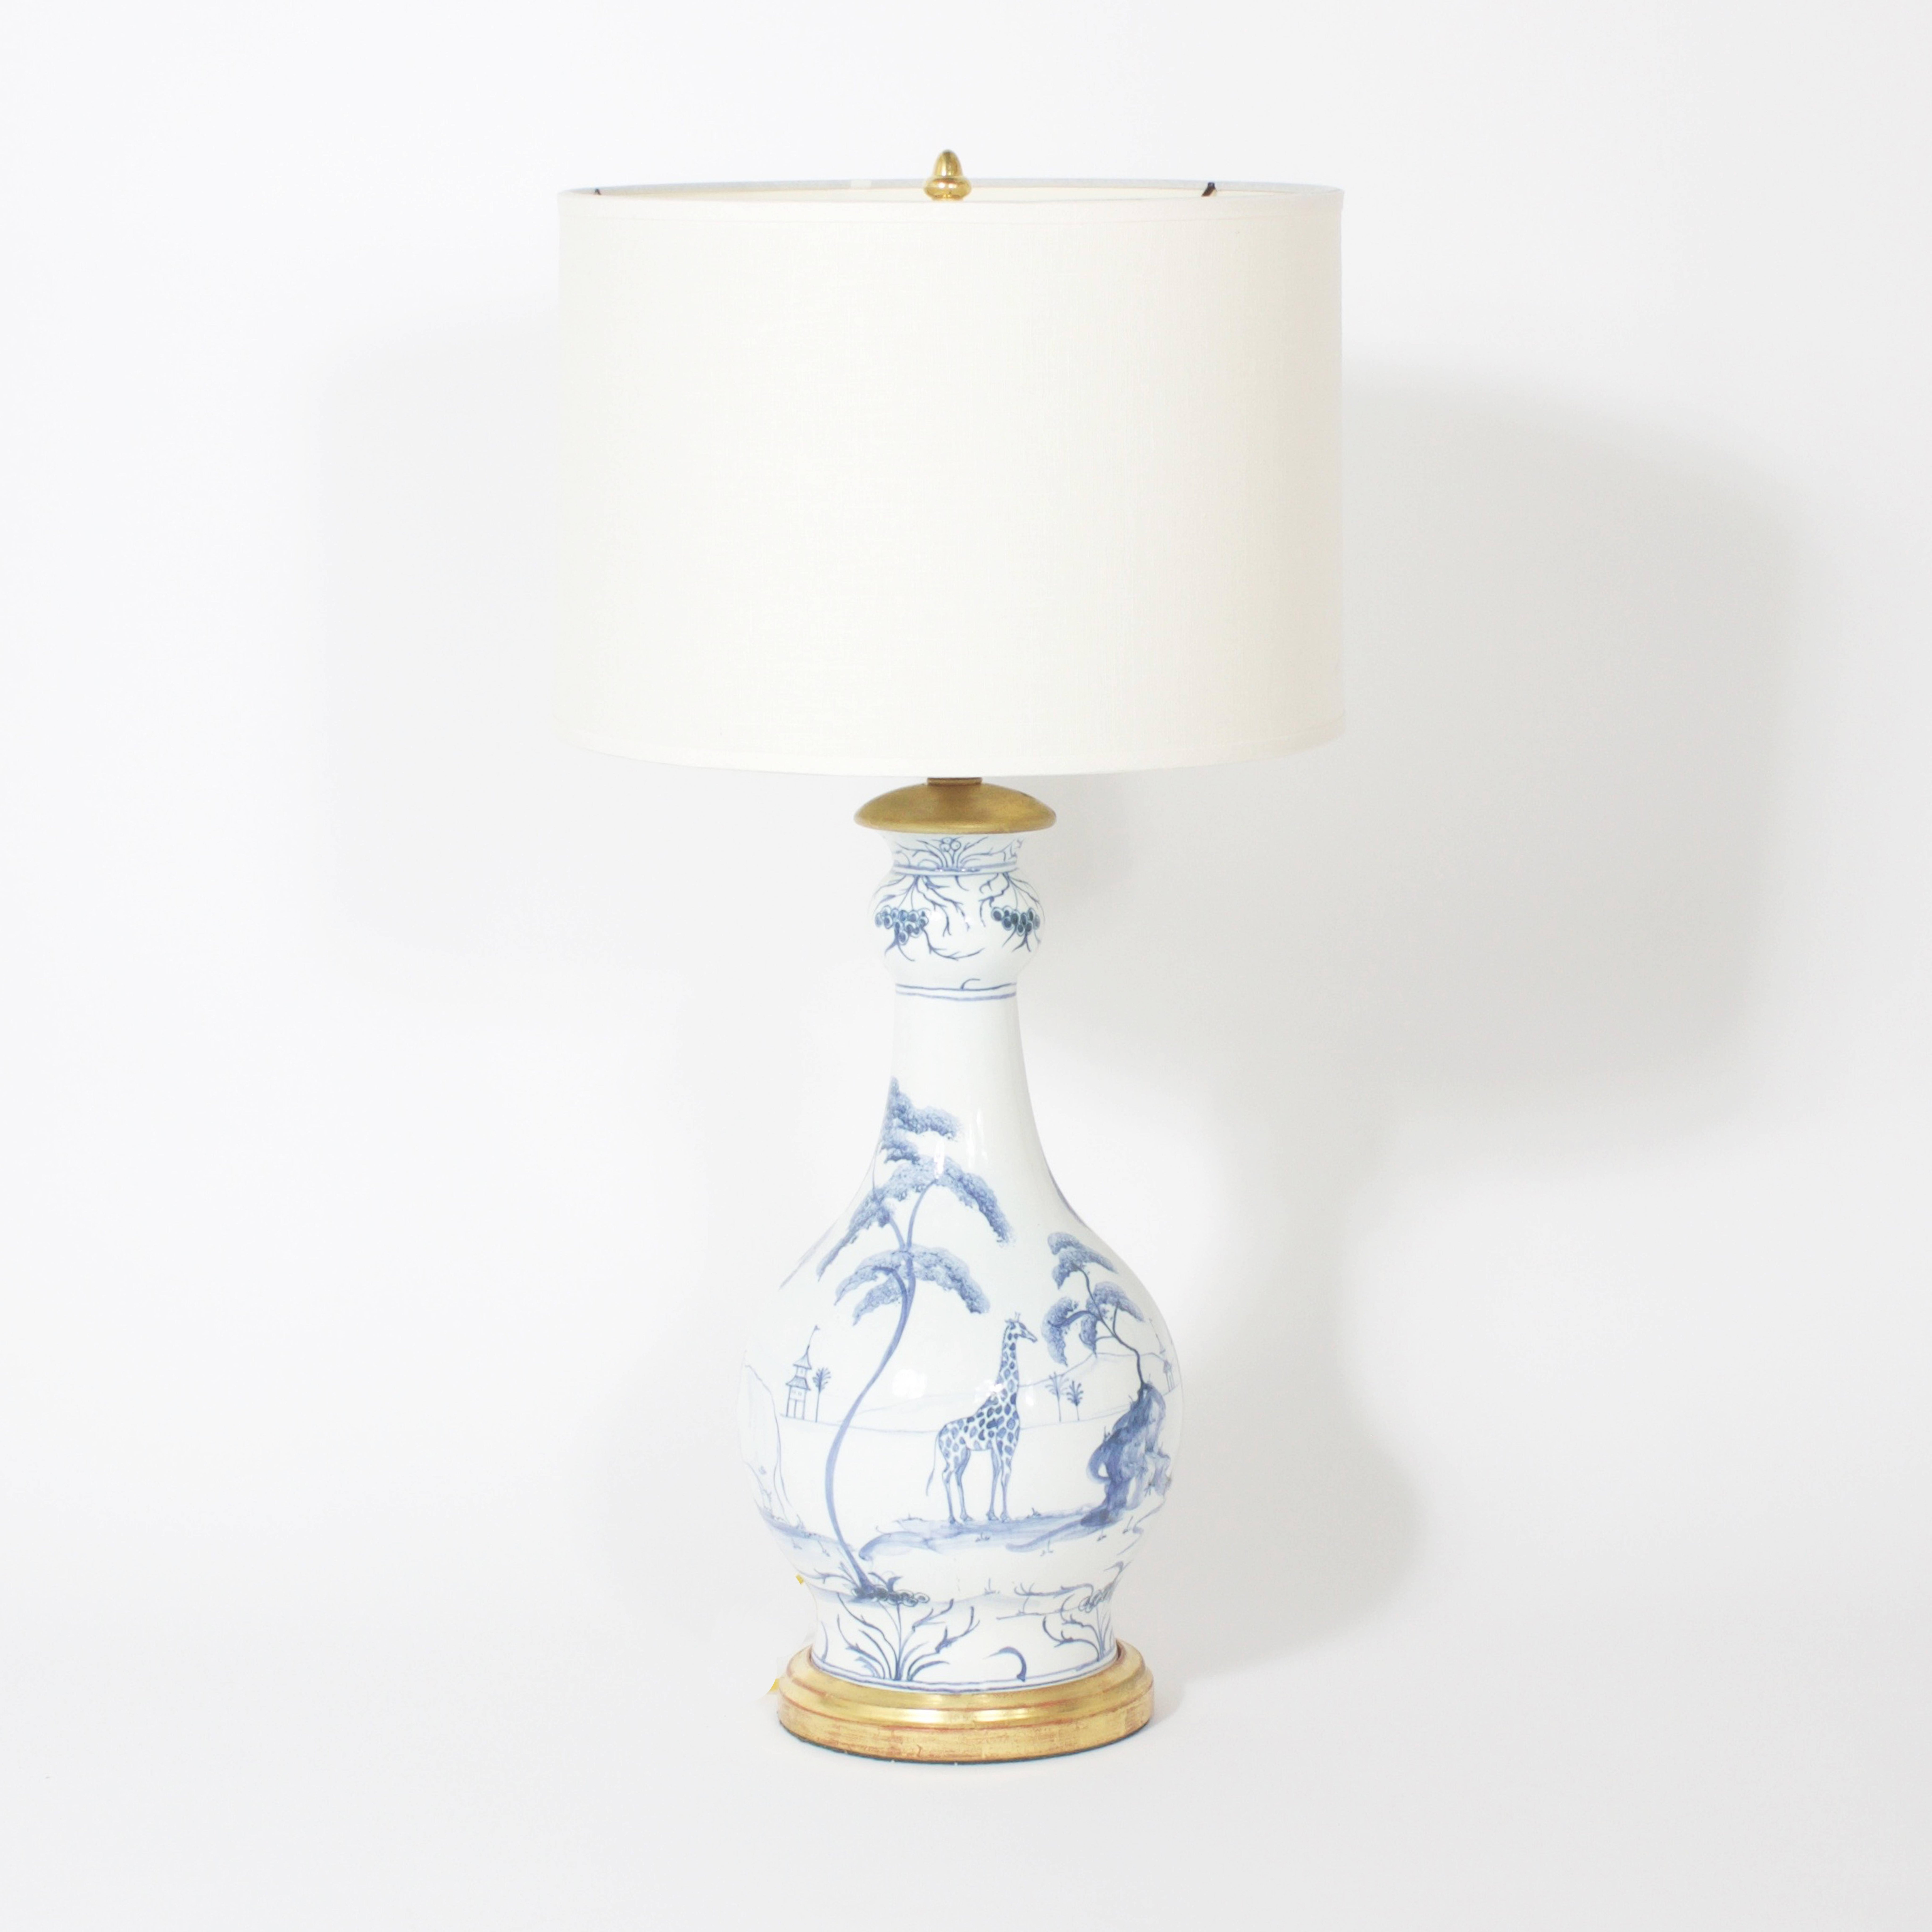 Rare Pair of Blue and White porcelain table lamps depicting African animals in natural settings with palm trees and native foliage. Each lamp has a camel, an elephant, a rhinoceros, and a giraffe. Both lamps are mounted on classical gilded wood